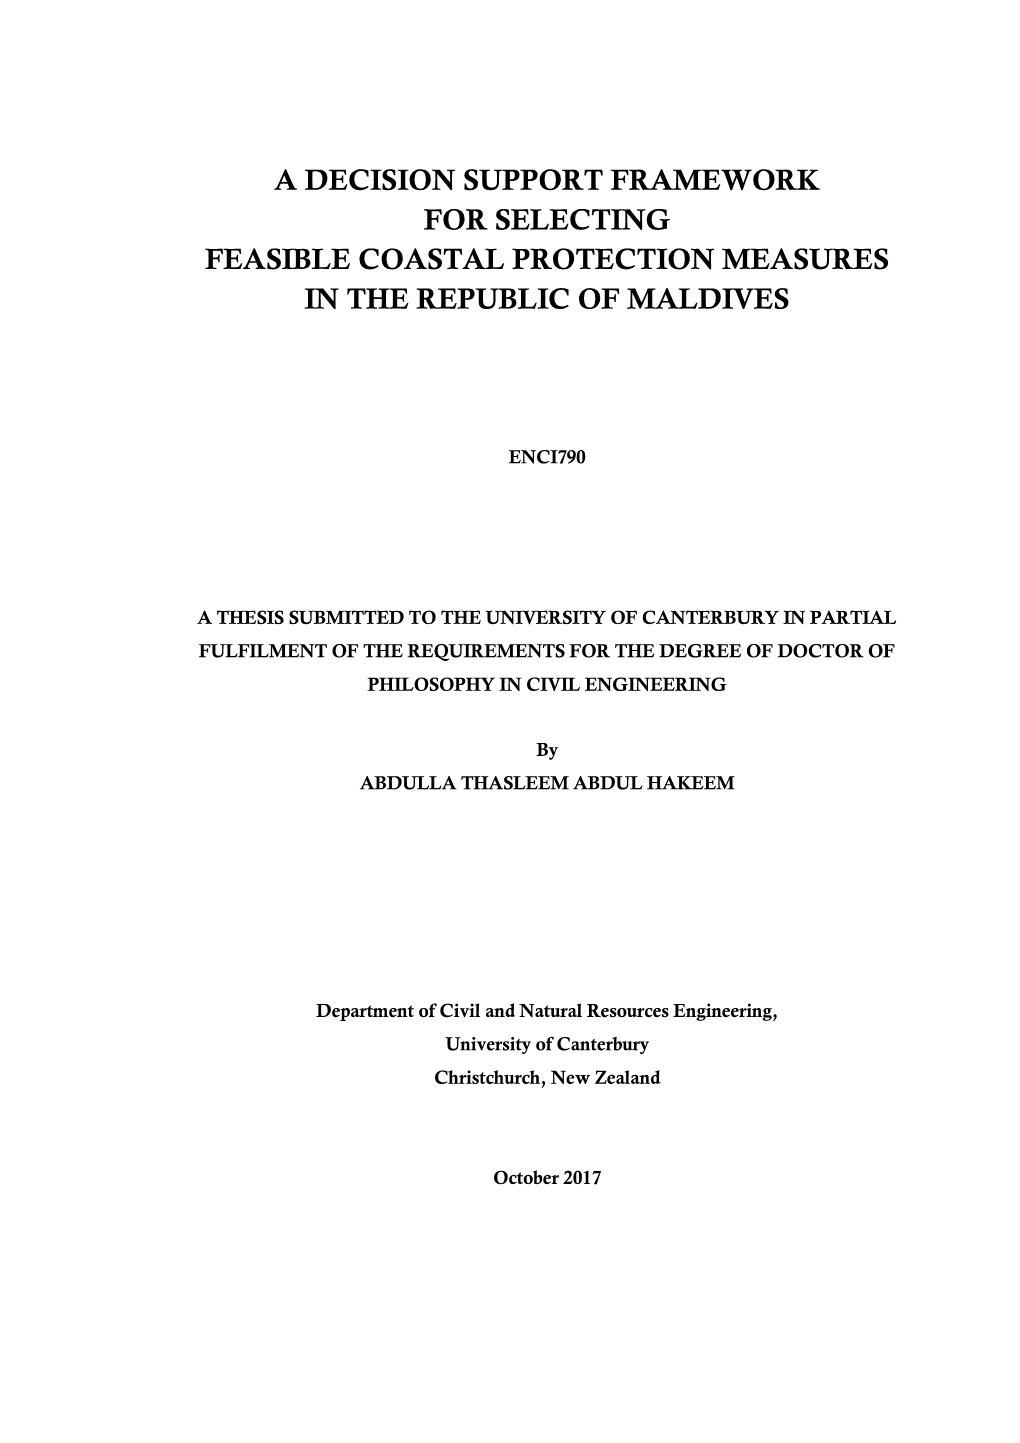 A Decision Support Framework for Selecting Feasible Coastal Protection Measures in the Republic of Maldives